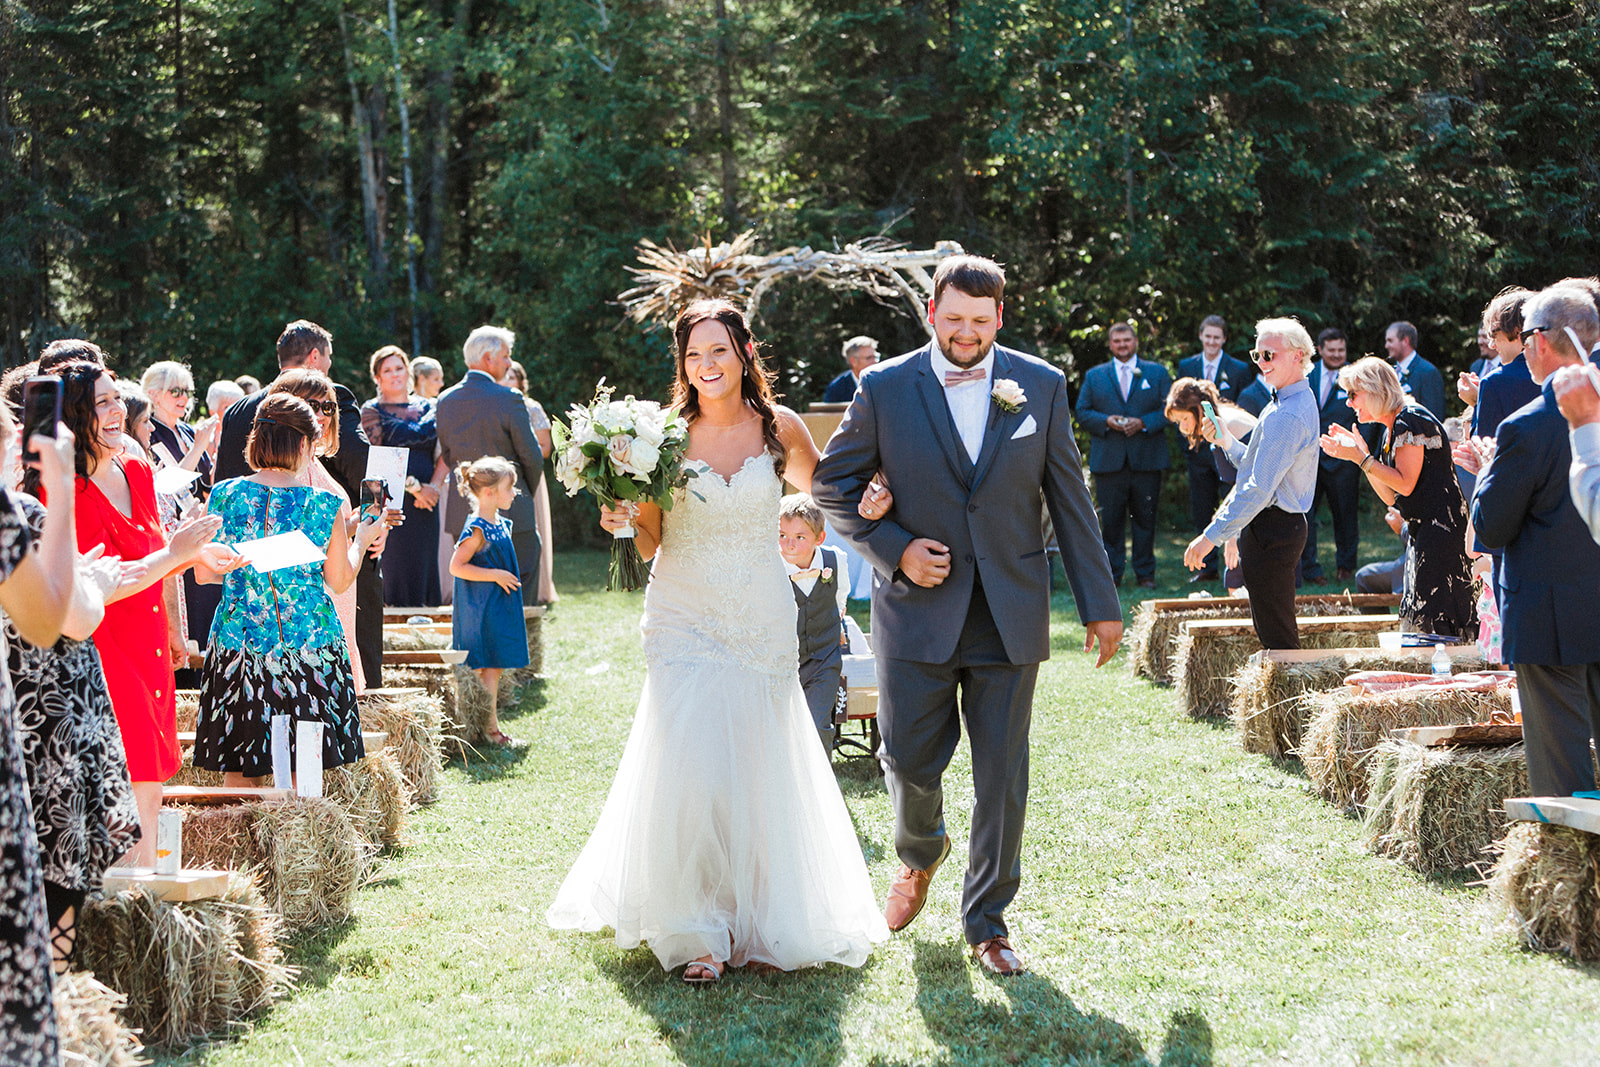 A backyard ceremony from a summer wedding in Minnesota